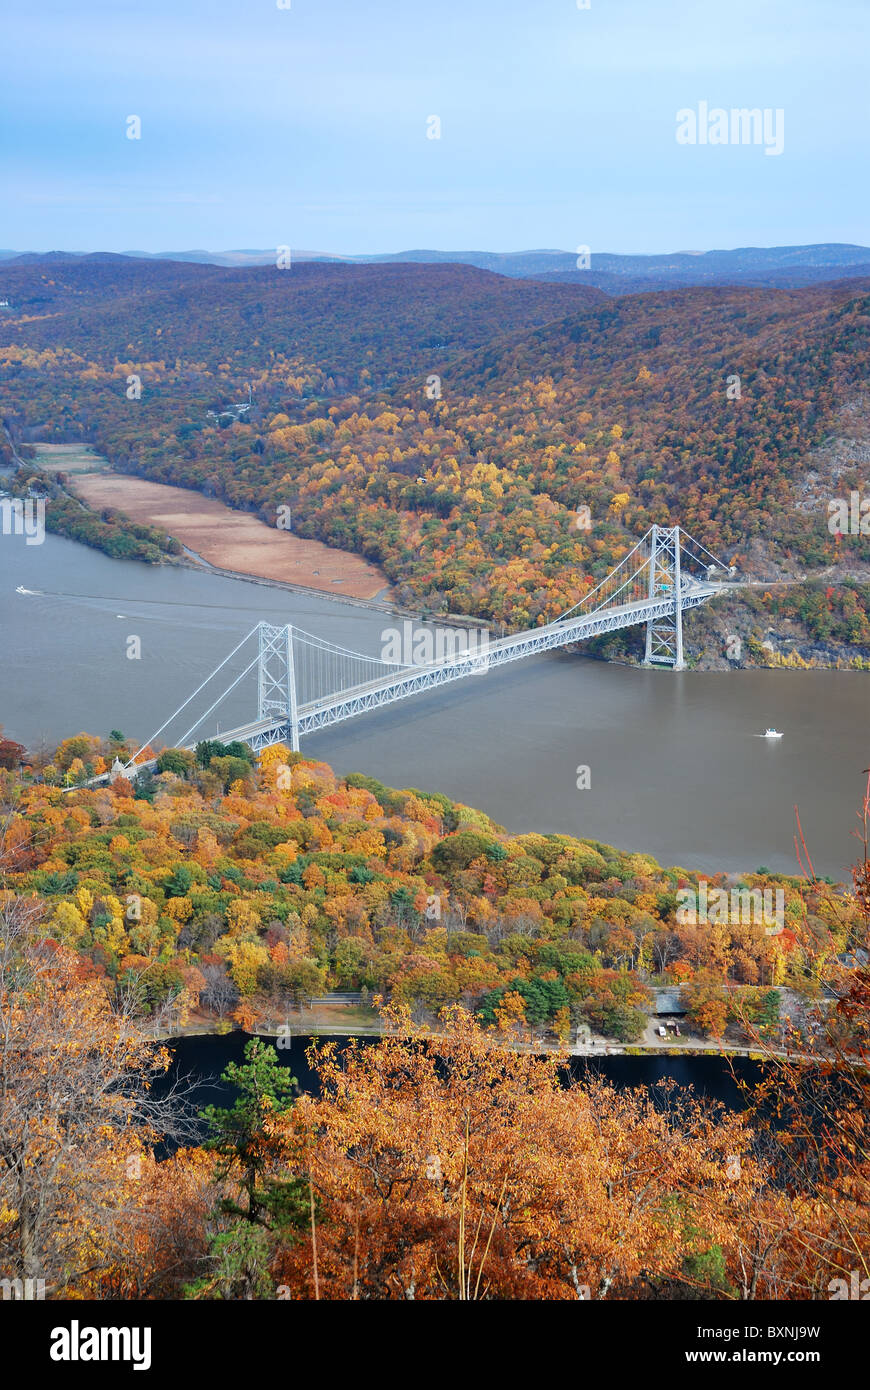 Bear Mountain bridge aerial view in Autumn with colorful trees in forest over Hudson River in New York State. Stock Photo